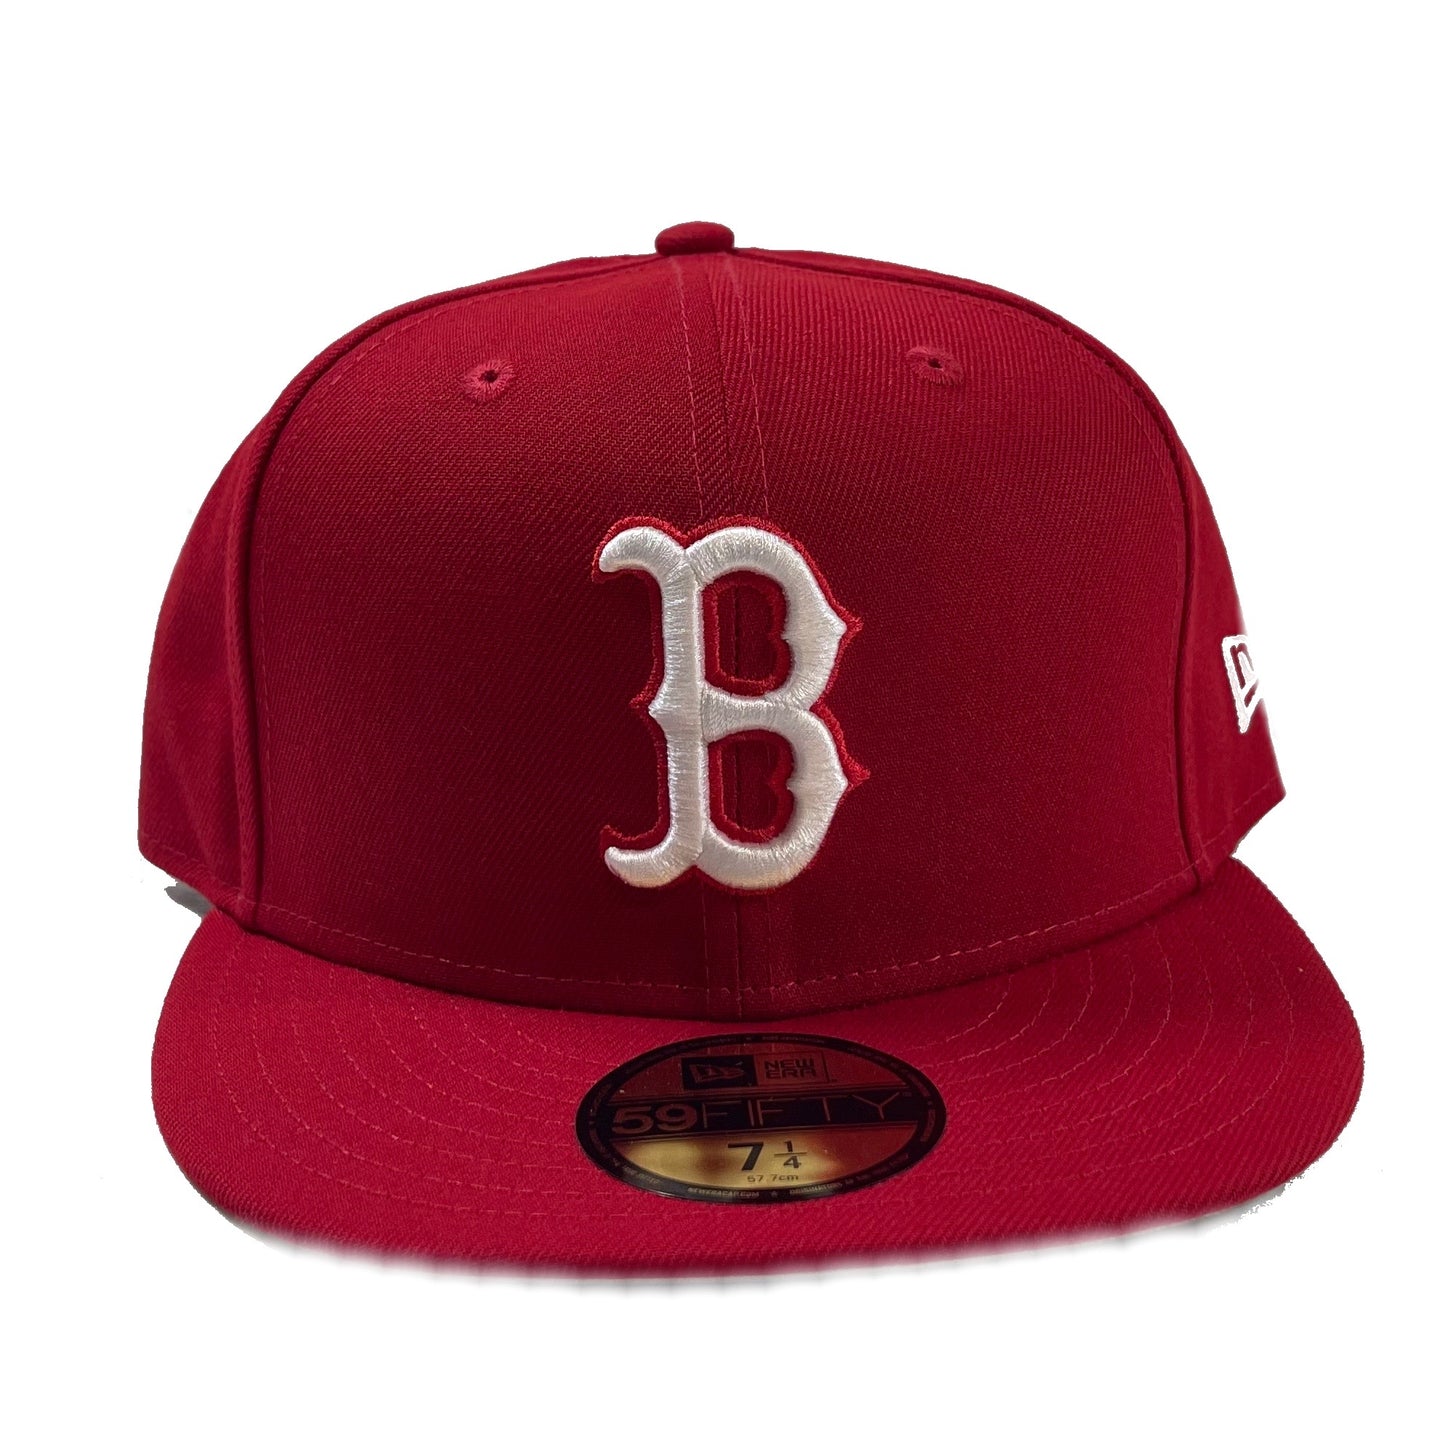 Boston Red Sox (Red) Fitted